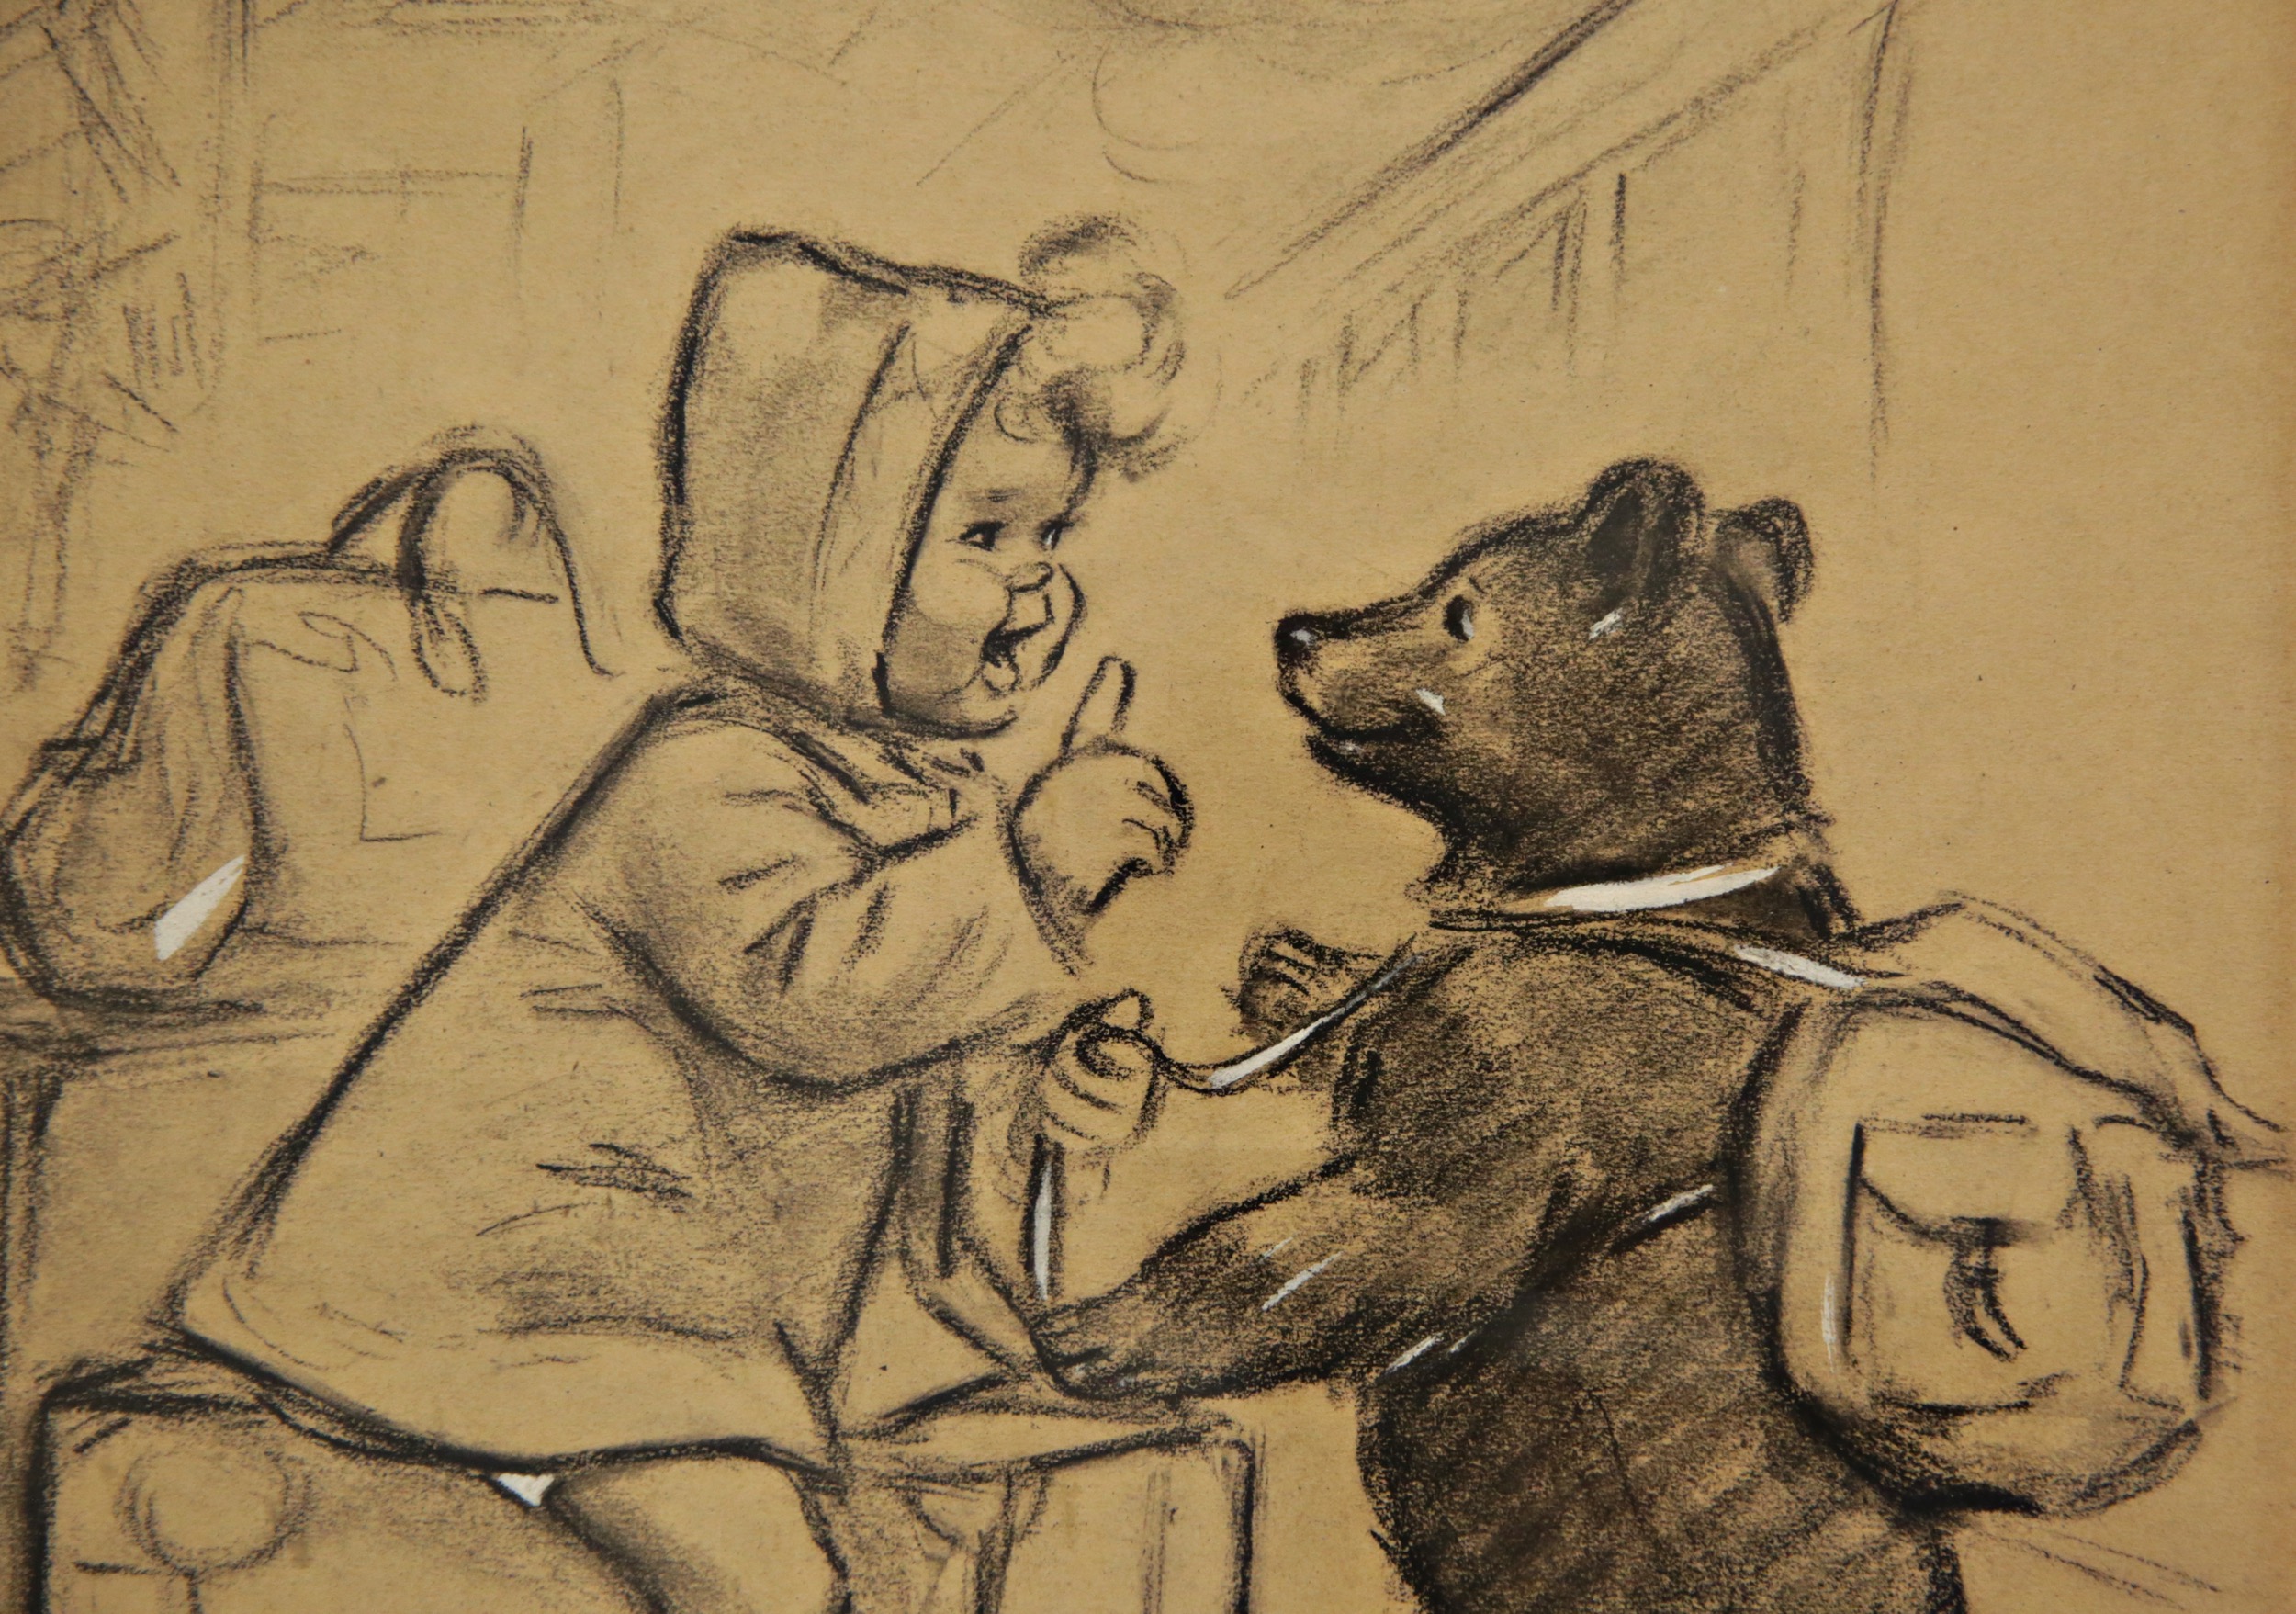 Germaine BOURET (1907-1953) "Child and bear", charcoal drawing and gouache, French, 20th C. - Image 5 of 6